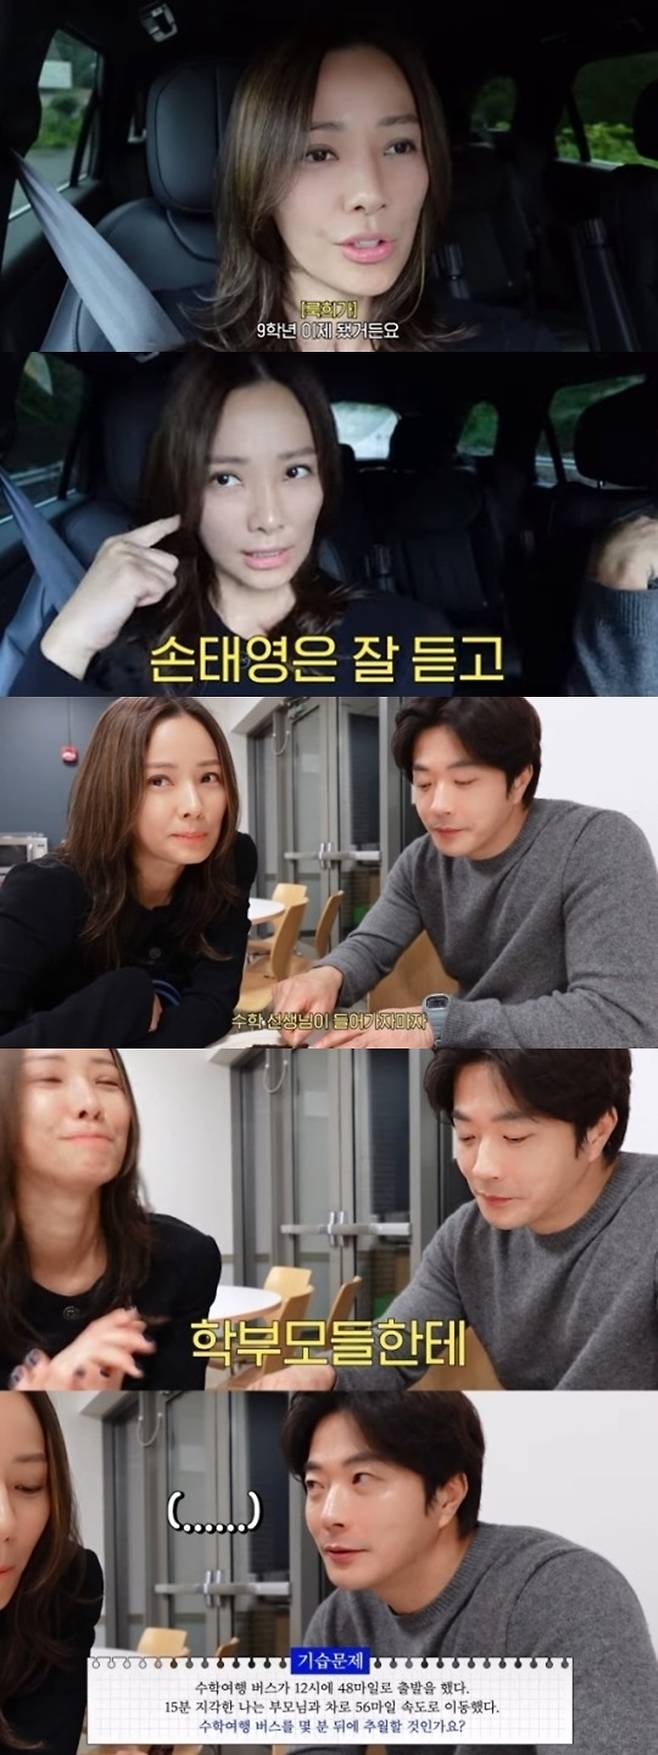 Actor Kwon Sang-woo Son Tae-young couple visited son look-hees school.On October 20, the channel Mrs. Princeton Son Tae-young posted a video titled How Son Tae-young  ⁇  Kwon Sang-woo and his wife lived in the U.S. for 15 years.On this day, Kwon Sang-woo Son Tae-young visited the look-hees school.Son Tae-young said, Look-hee has become 9 grade. It is a briefing session to 9 grade to 12 grade Parents.When I hand out my childs timetable, my parents have to go to the class. It takes three and a half hours to go to the class for 10 minutes each. Kwon Sang-woo added a smile by saying, Im going to study English. Son Tae-young said, I listen well and this person speaks well.After that, the two of them finished a briefing session and released a rest while eating fruit.Son Tae-young said, Teachers said, We will let the children know until the end, and if they need help at any time, lets talk and talk.He said, So far, its been okay. Its been going well. It was totally comfortable. There are so many school events that I can not do alone. Fortunately, my husband was glad to come.I want to have fun in school.Kwon Sang-woo said, I was embarrassed that my math teacher gave the Parents a problem, and I asked them to solve the equation problem. Kwon Sang-woo also remembered the problem he solved.Meanwhile, Son Tae-young said, Son is puberty and eats five meals. I am about 170 ~ 171cm, and son is bigger than me.Kwon Sang-woo and Son Tae-young married in 2008 and have one male and one female.Son Tae-young revealed her sons look-hee pick-up to Yale University where she was taking classes and told her mothers wish that she would come here.